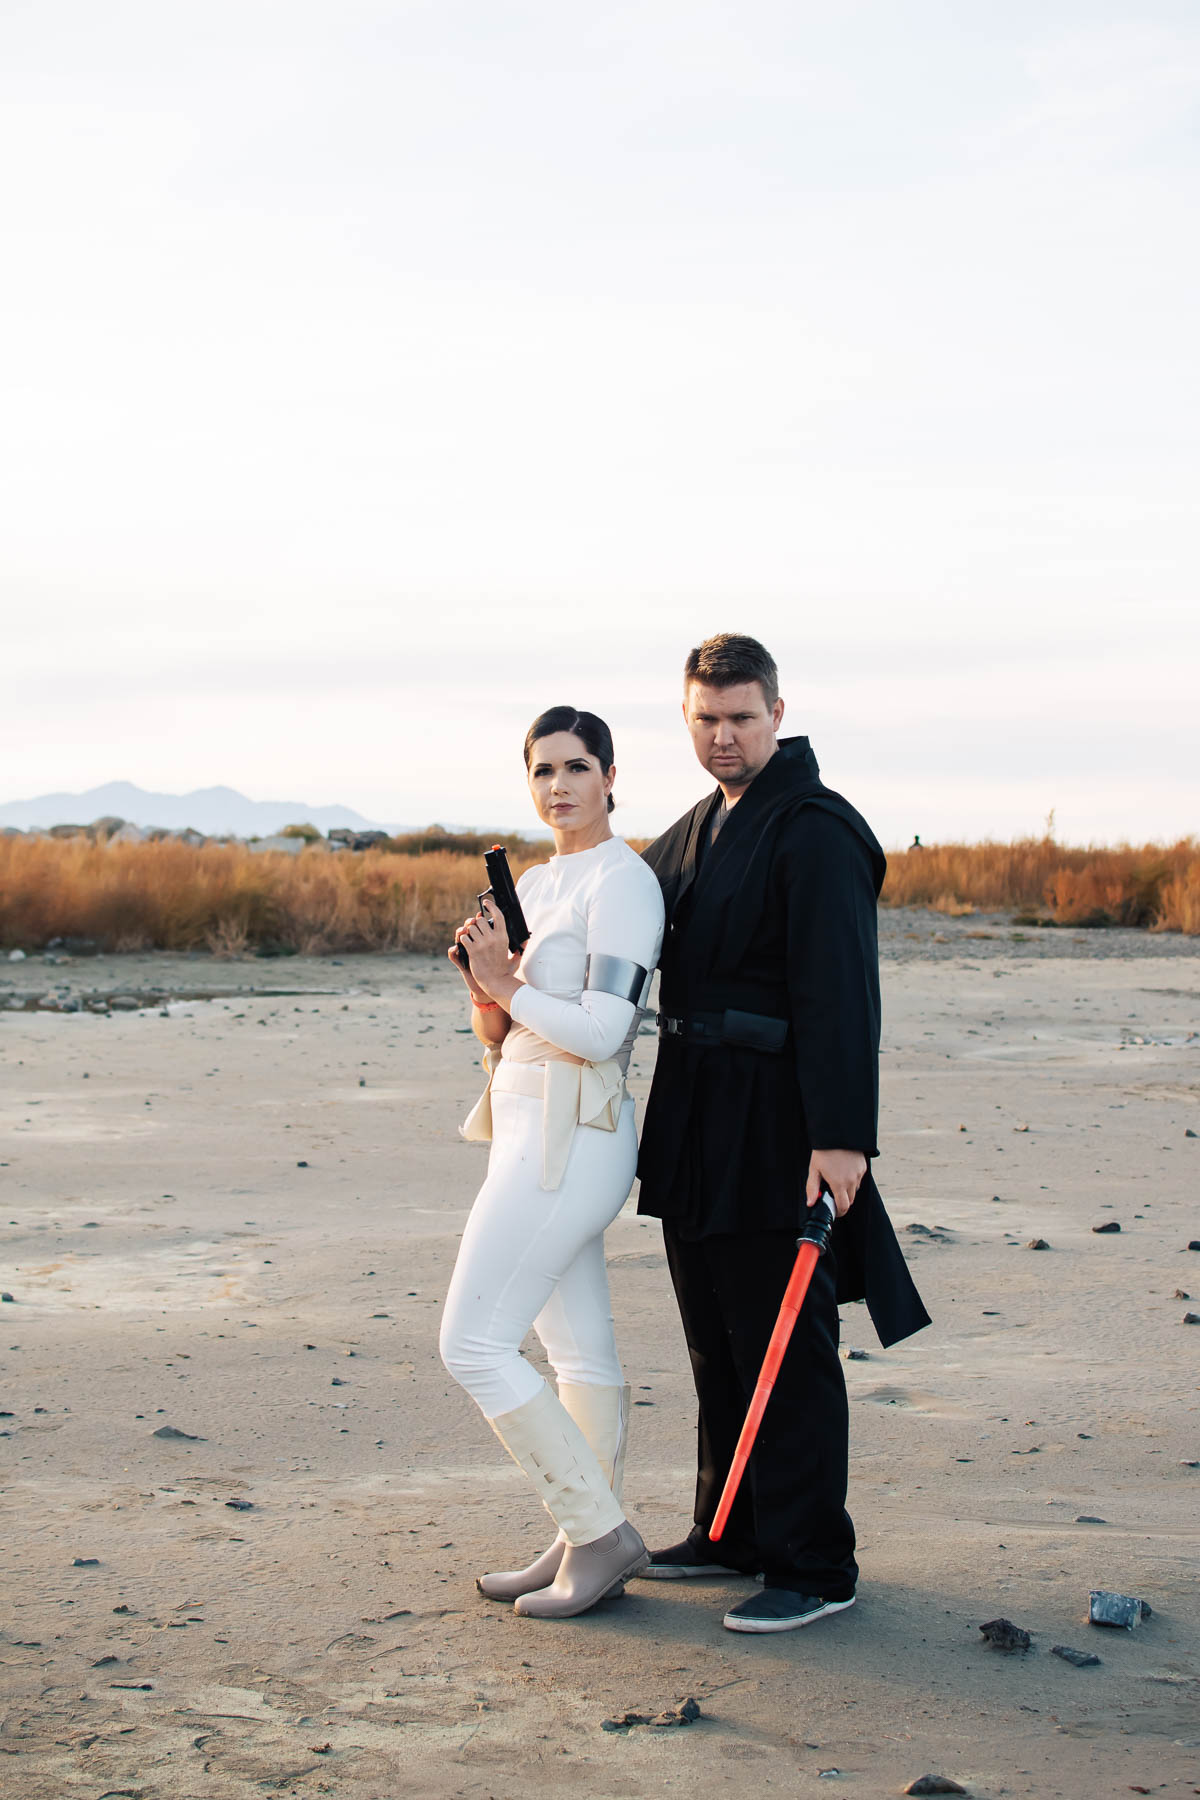 Woman dressed as Padme holds gun and stands next to man dressed as Anakin.